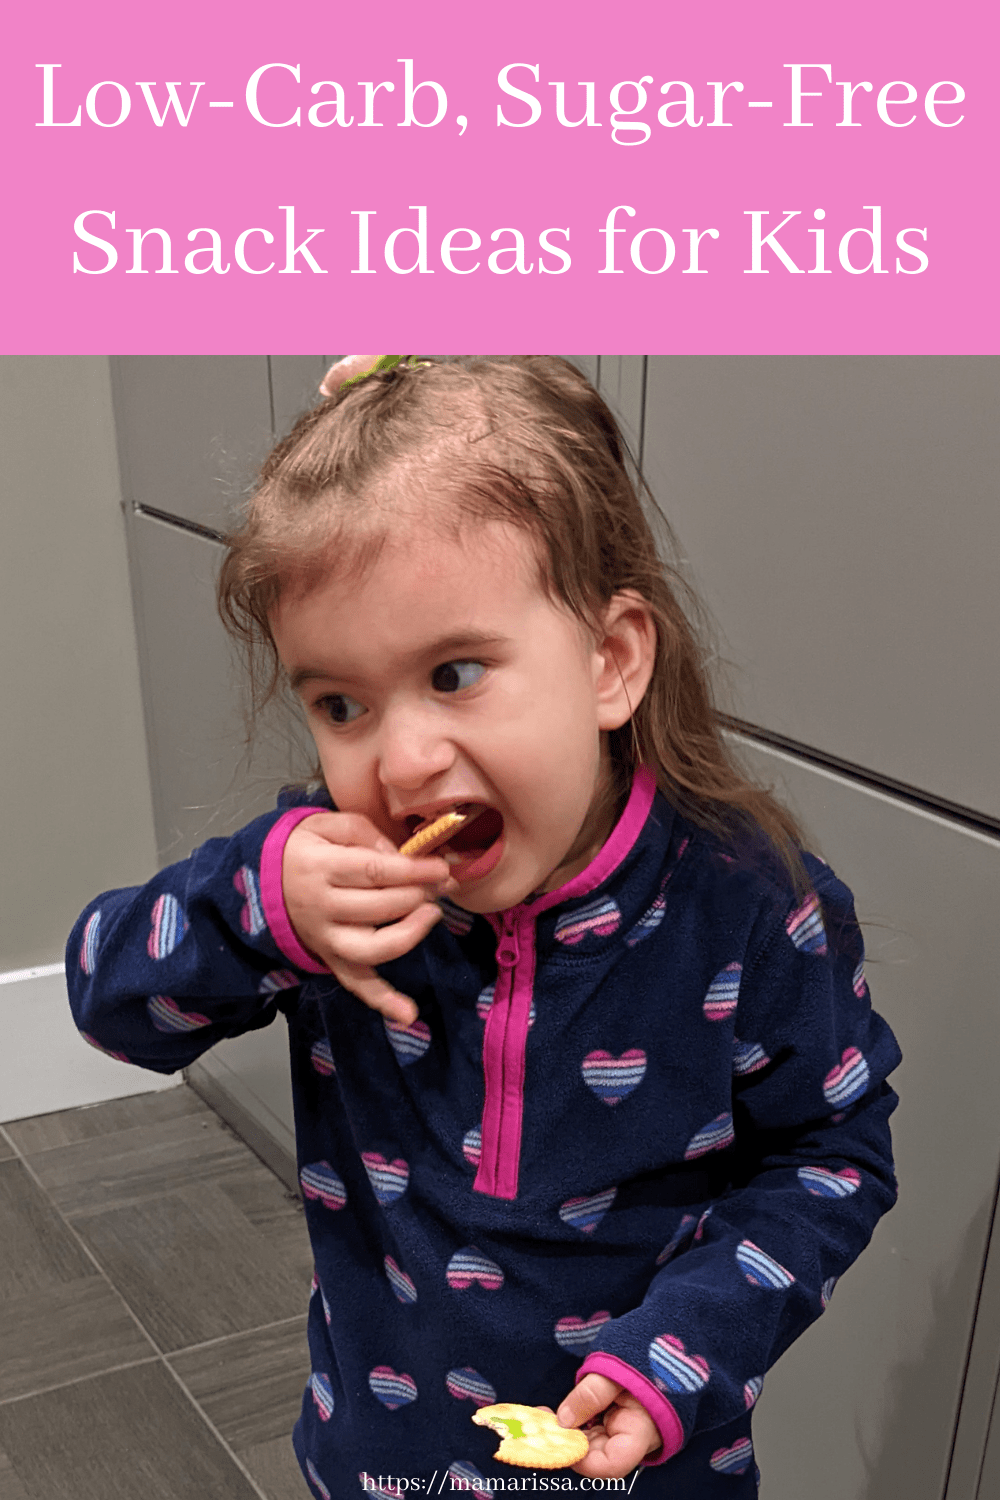 Low-Carb, Sugar-Free Snack Ideas for Kids